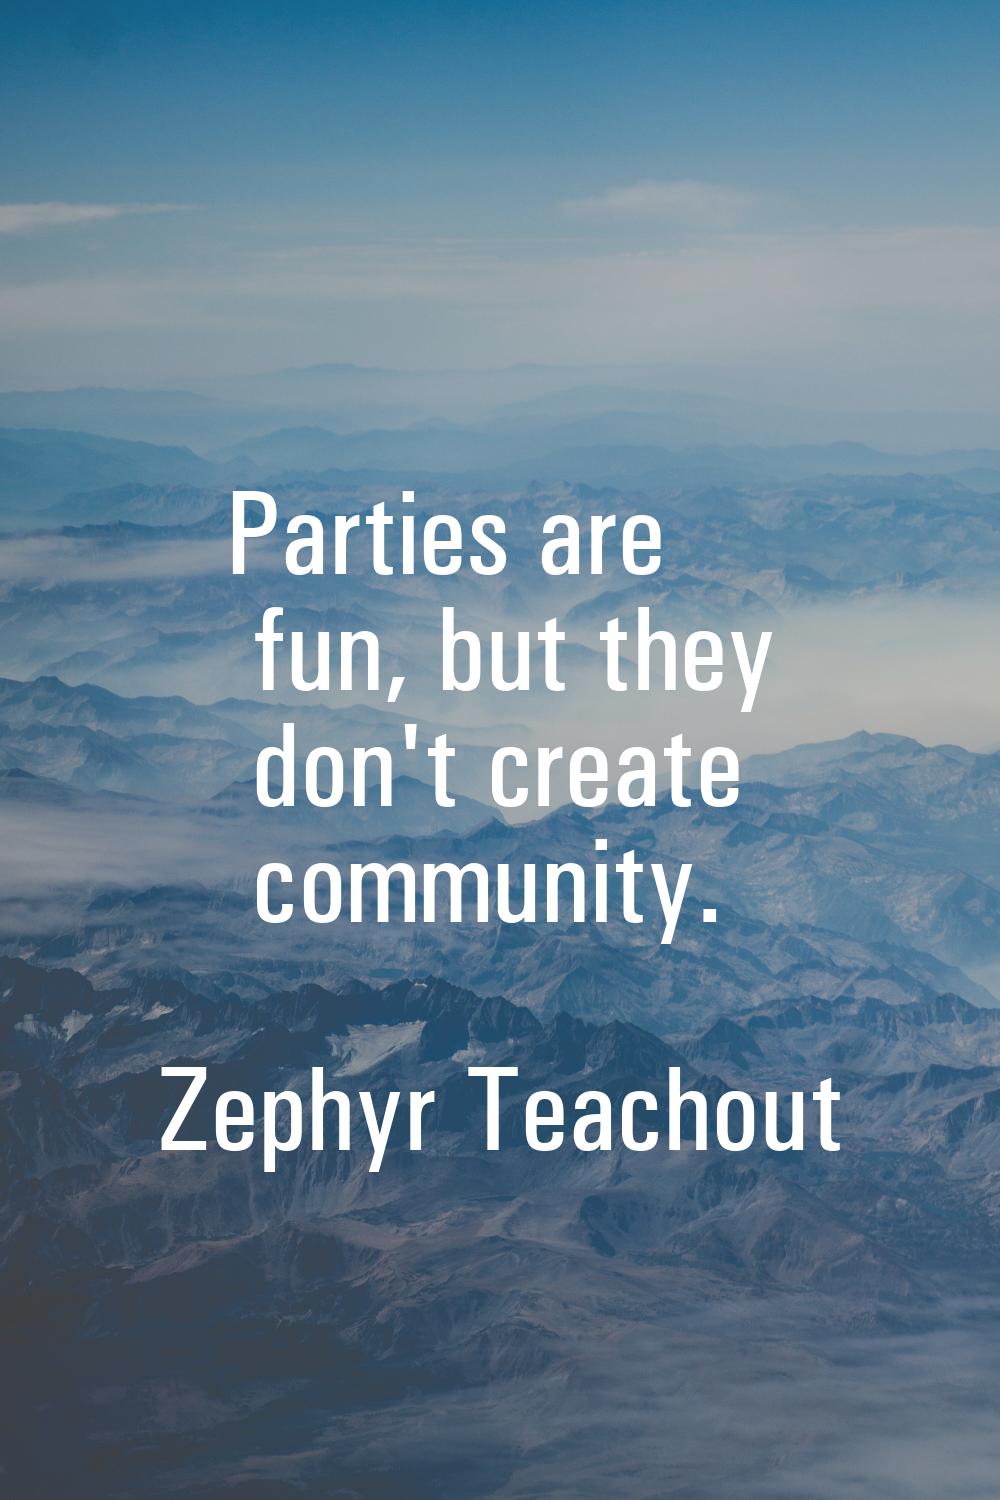 Parties are fun, but they don't create community.